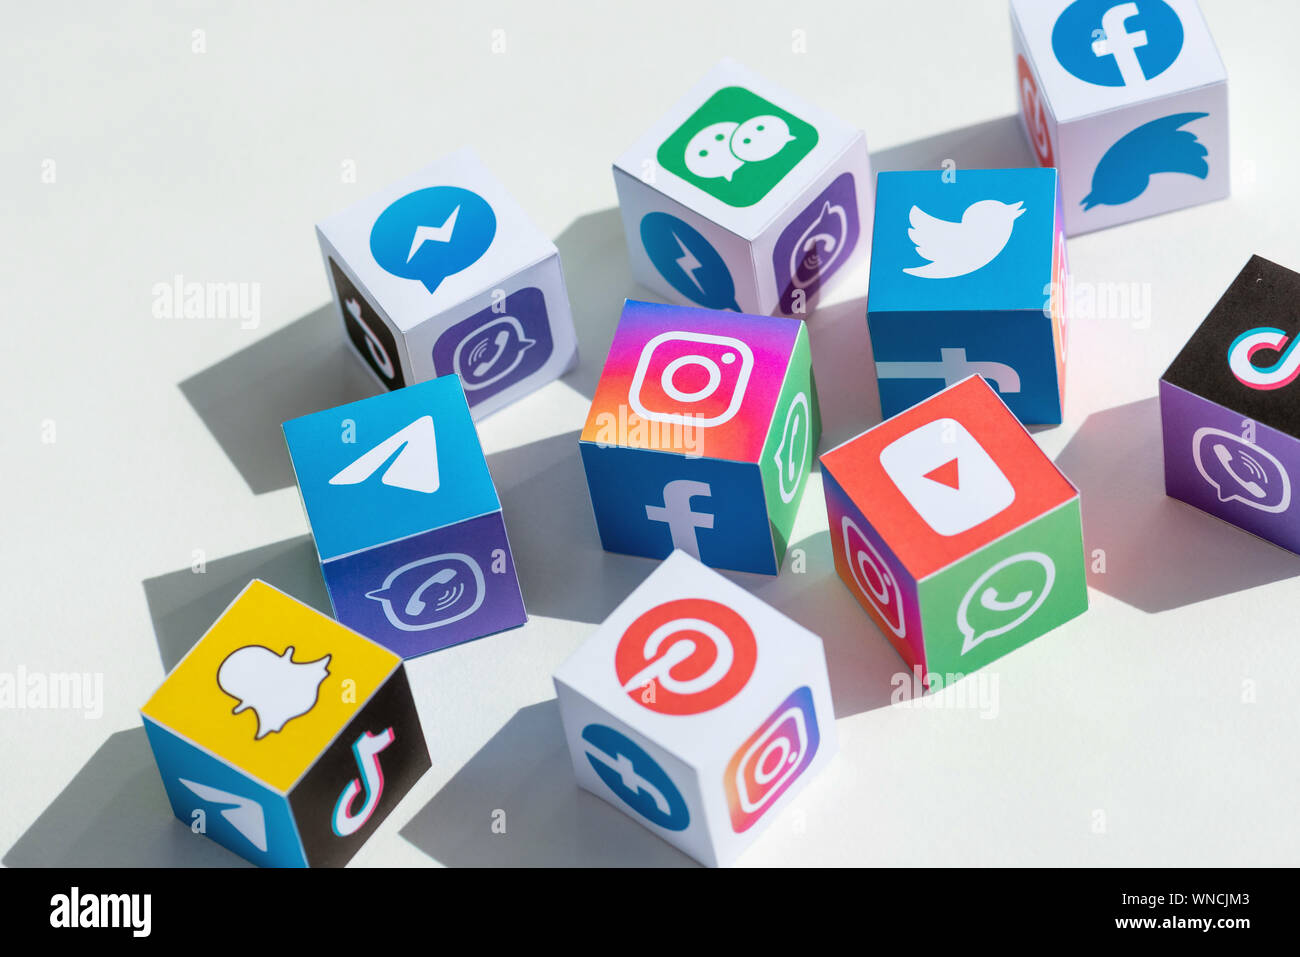 A paper cubes collection with printed logos of world-famous social networks and online messengers. Stock Photo